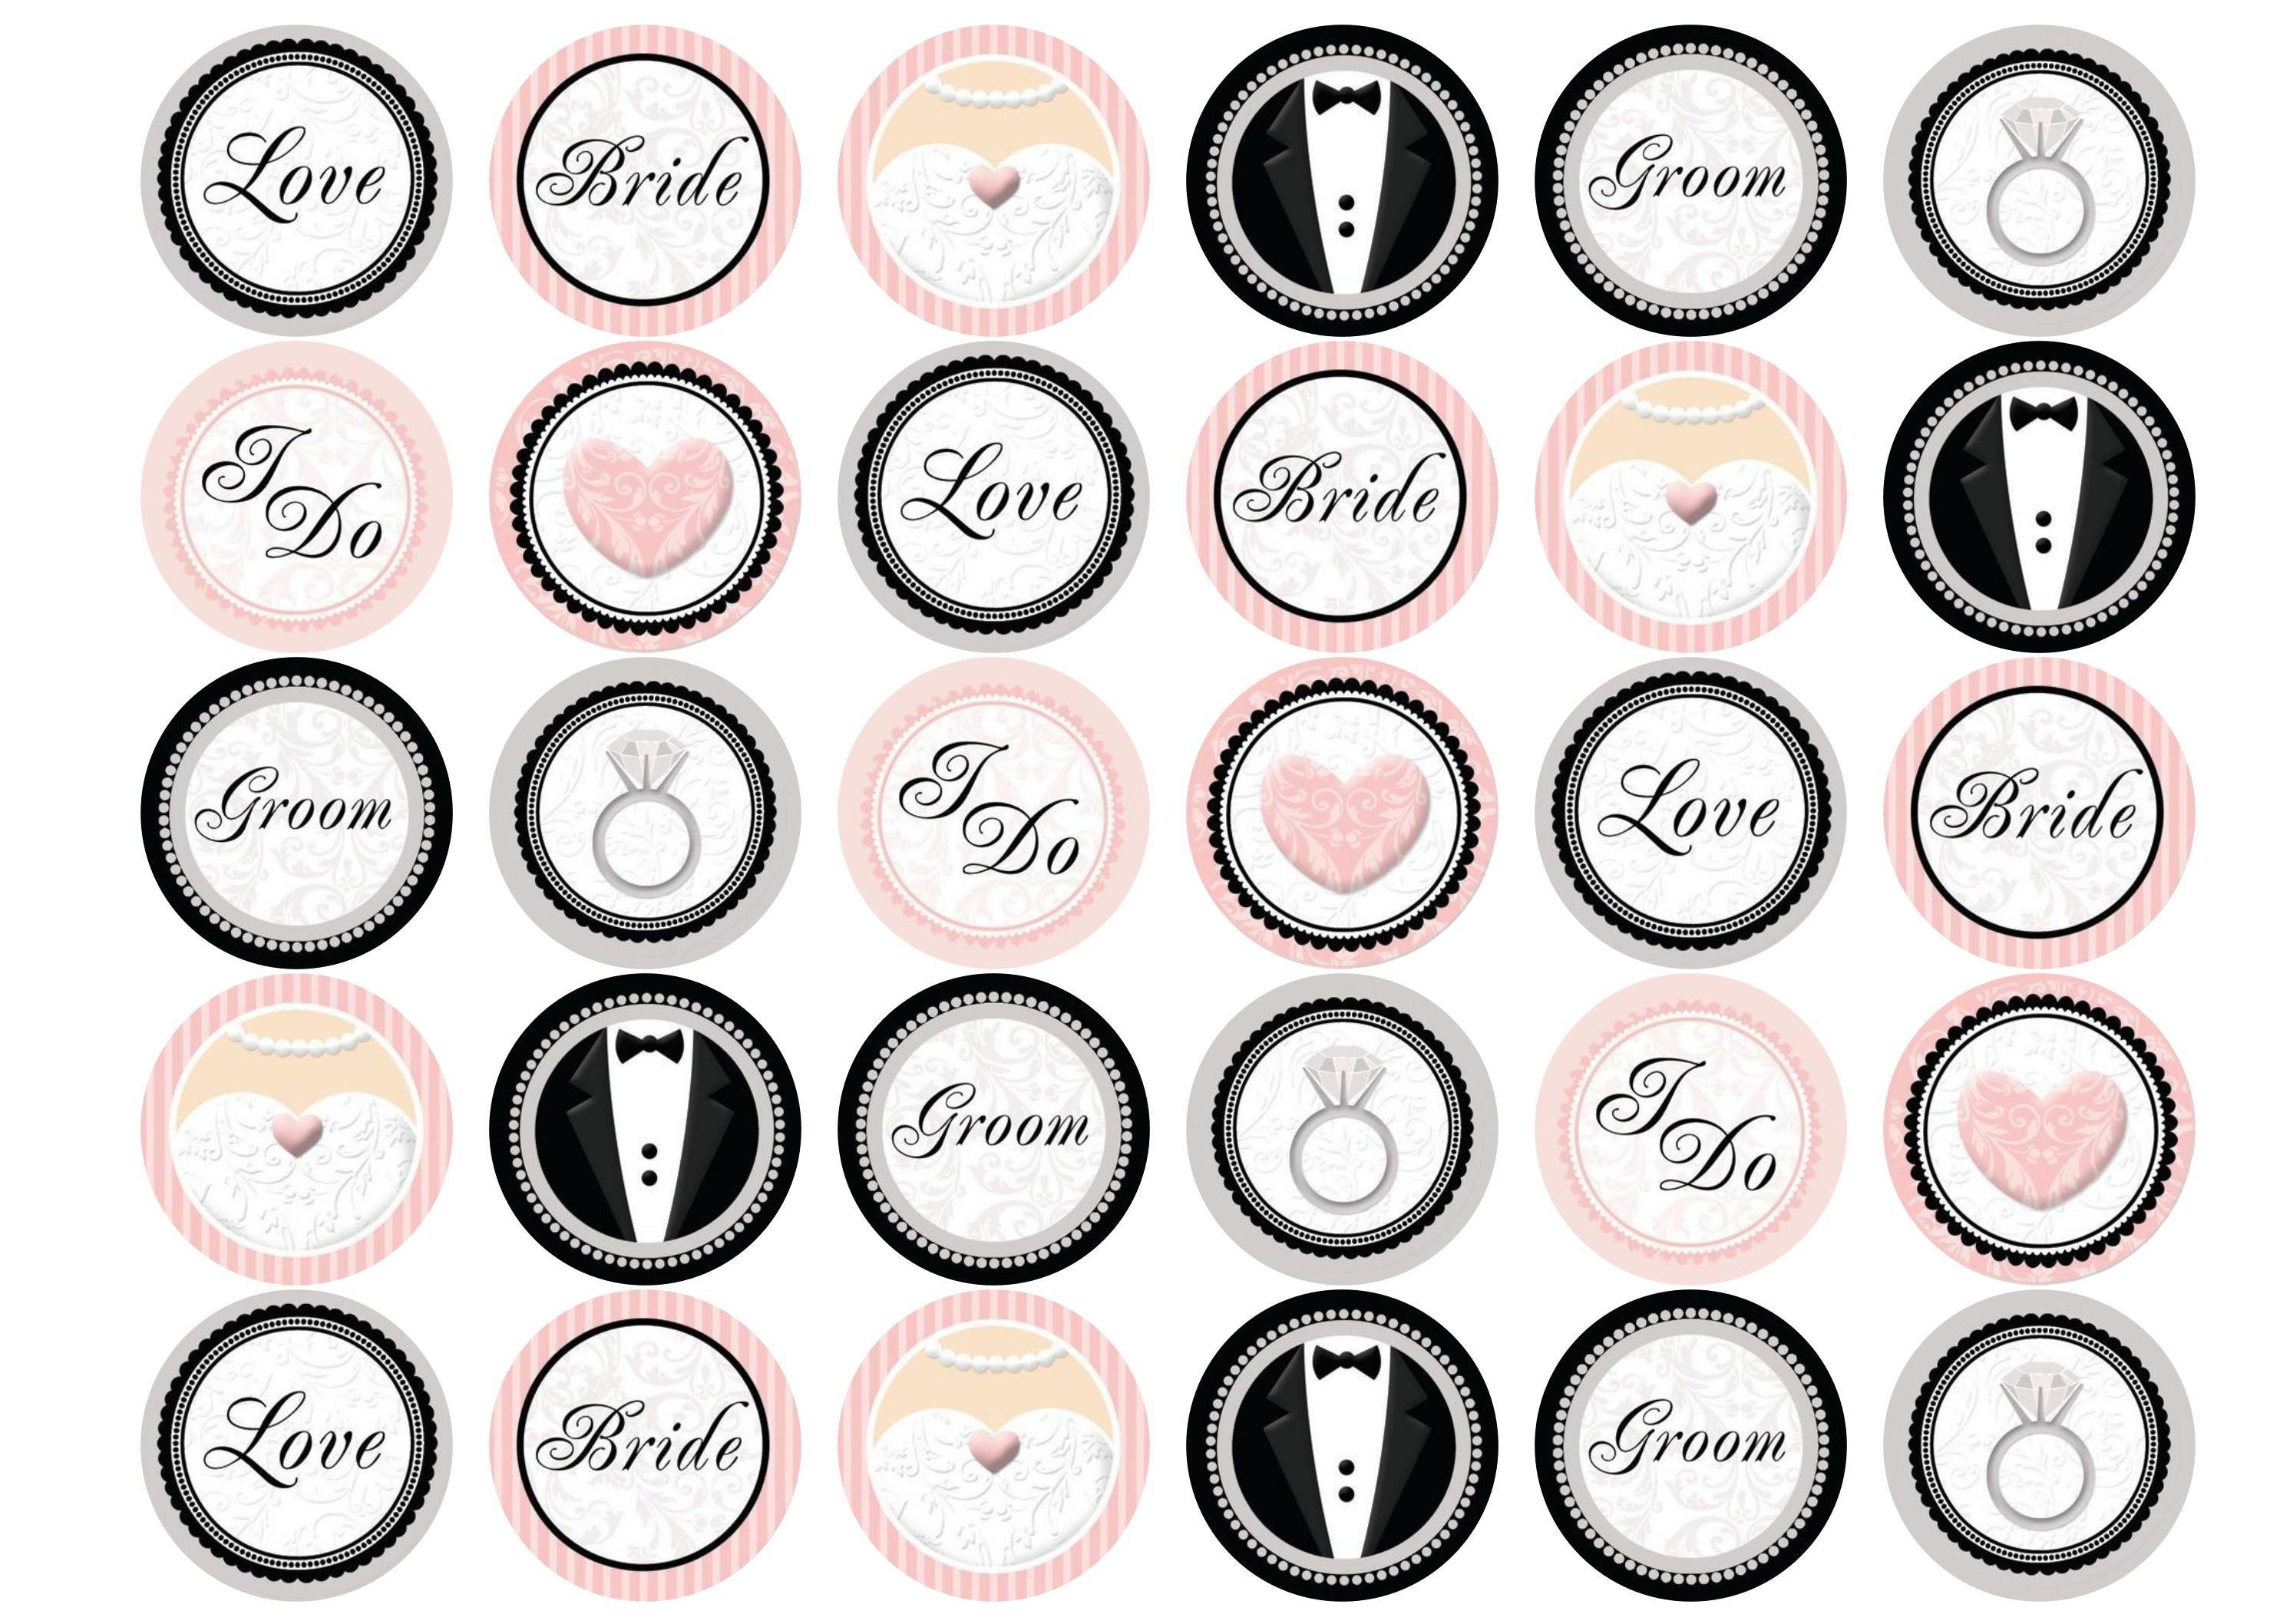 30 edible cupcake toppers with a pink and black wedding design